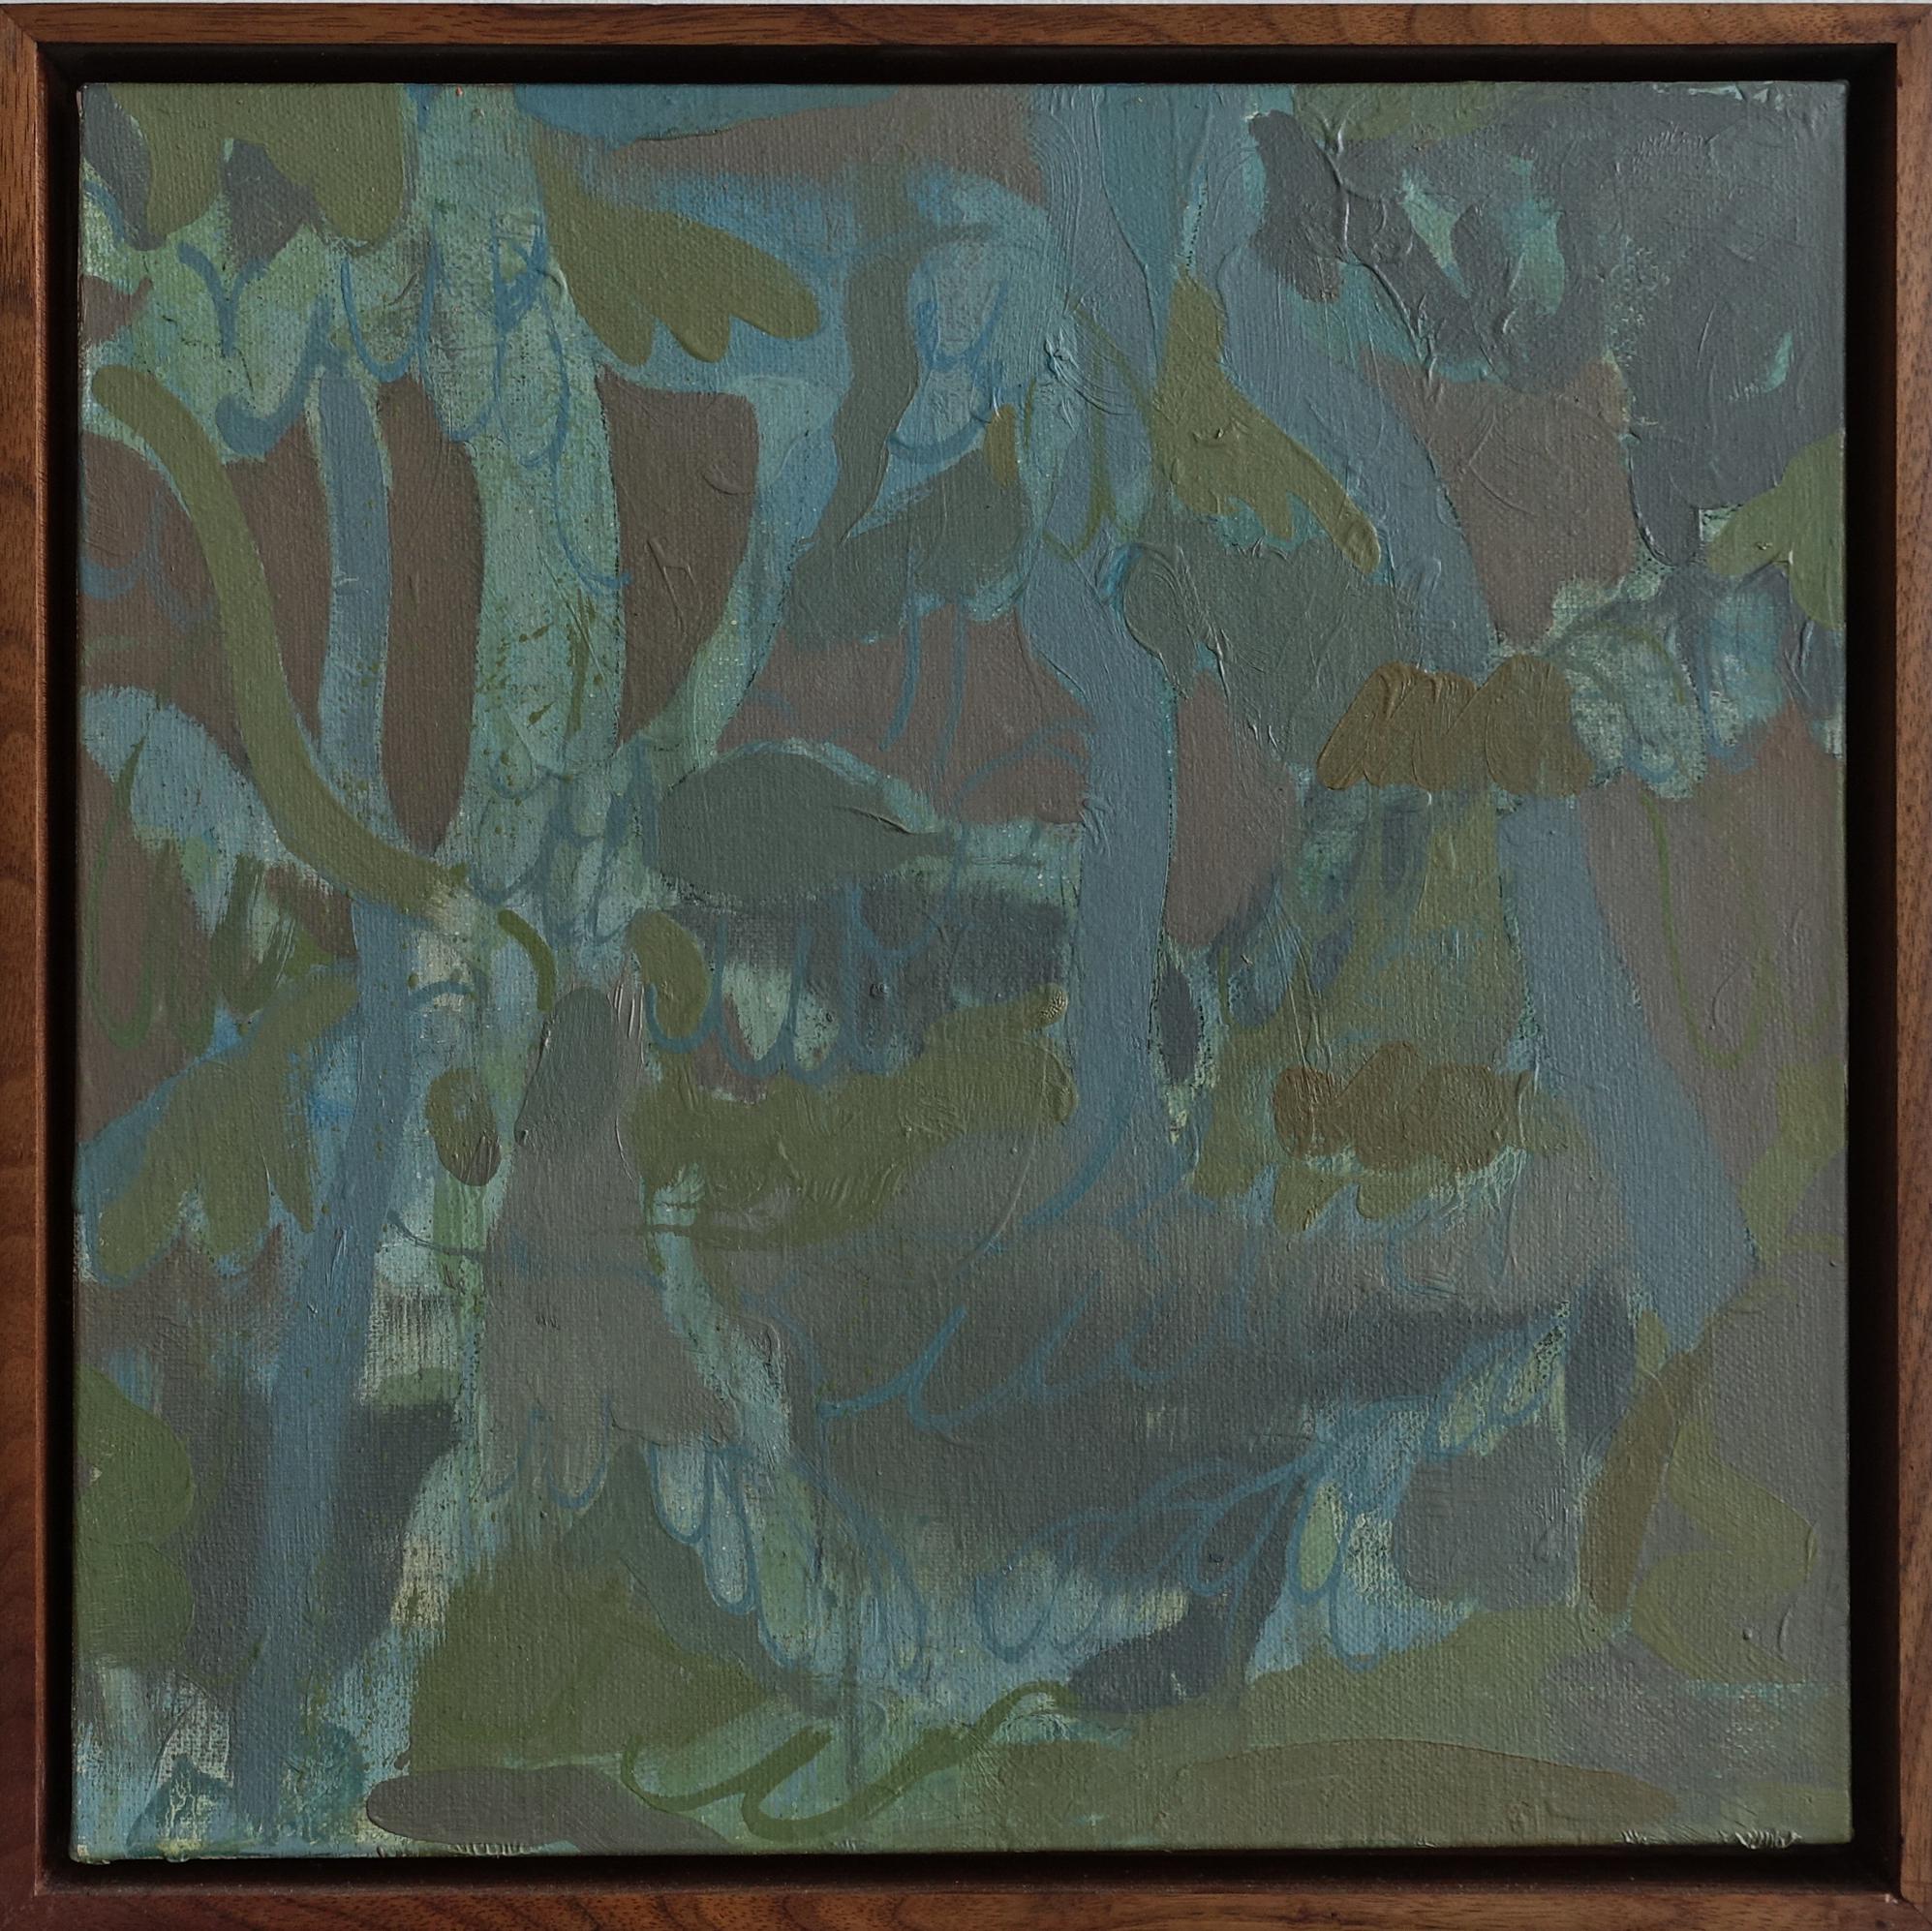 "Bells" an abstract landscape painting, oil on canvas by Skylar Hughes. Using a palette of cool blues and greens, Skylar is interested in painting as the representation of our relationship to and experience of nature. The landscape tradition serves